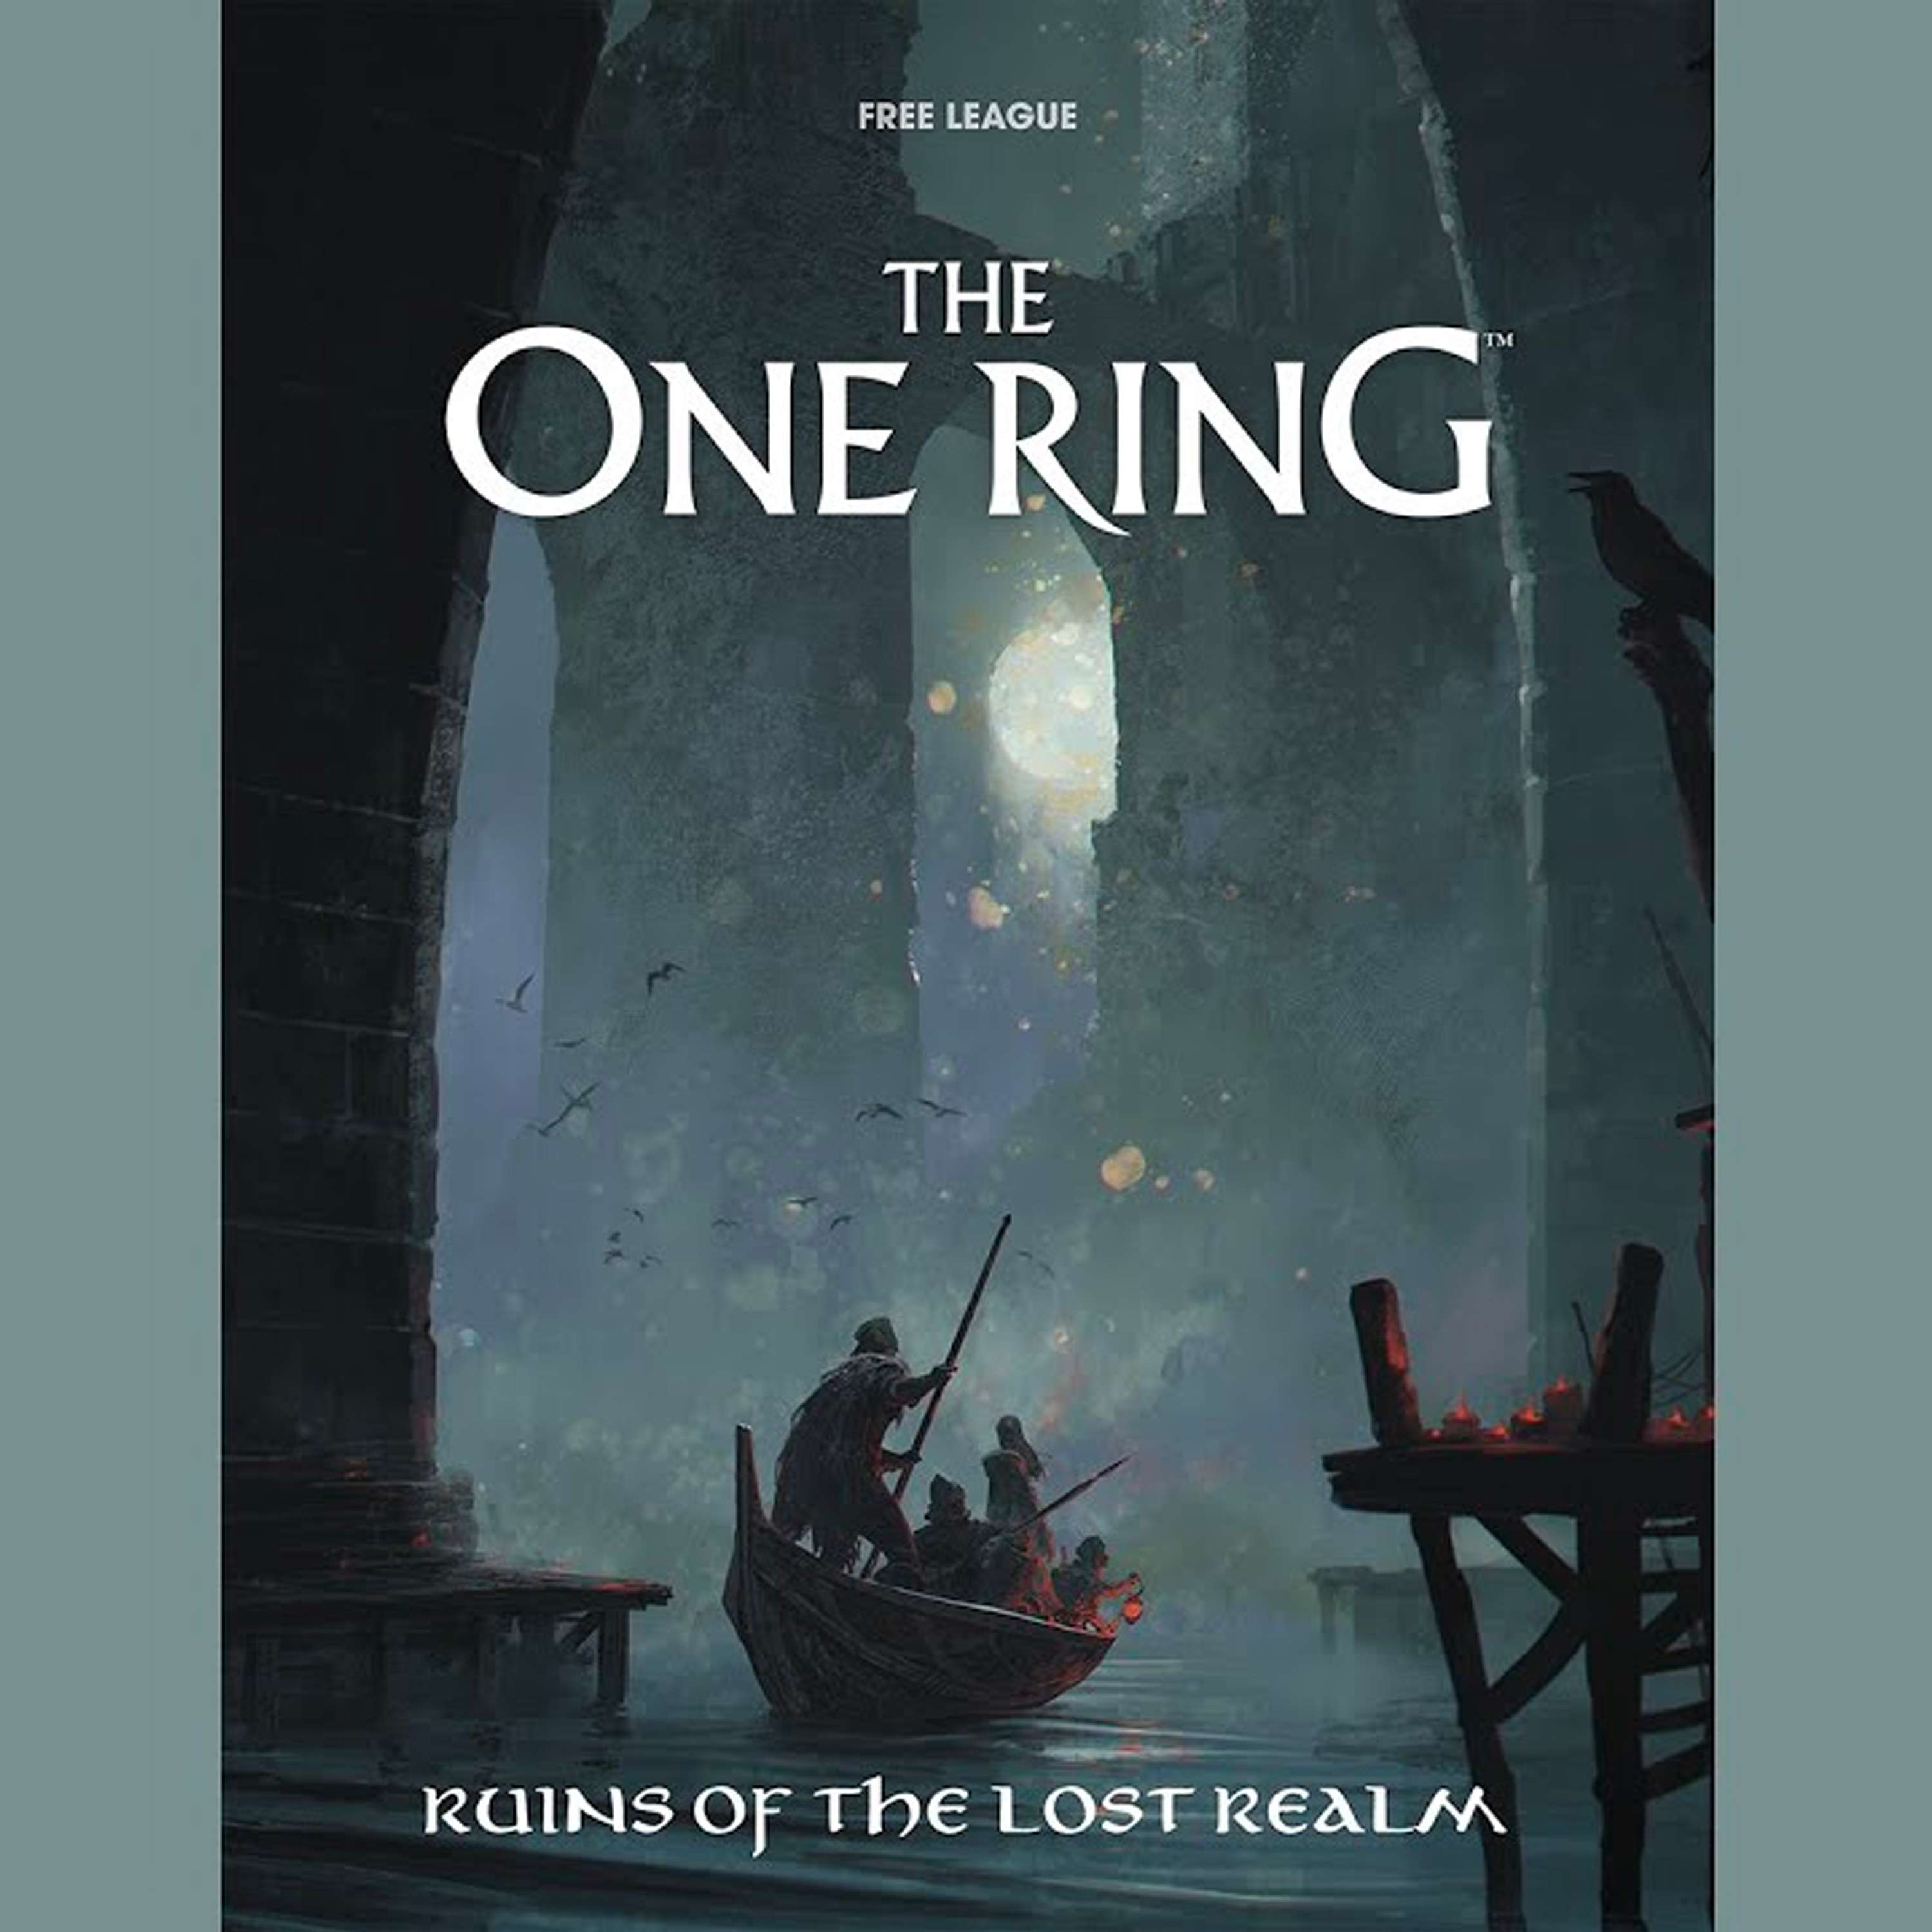 Discussing RUINS OF THE LOST REALM for The One Ring RPG with Francesco Nepitello